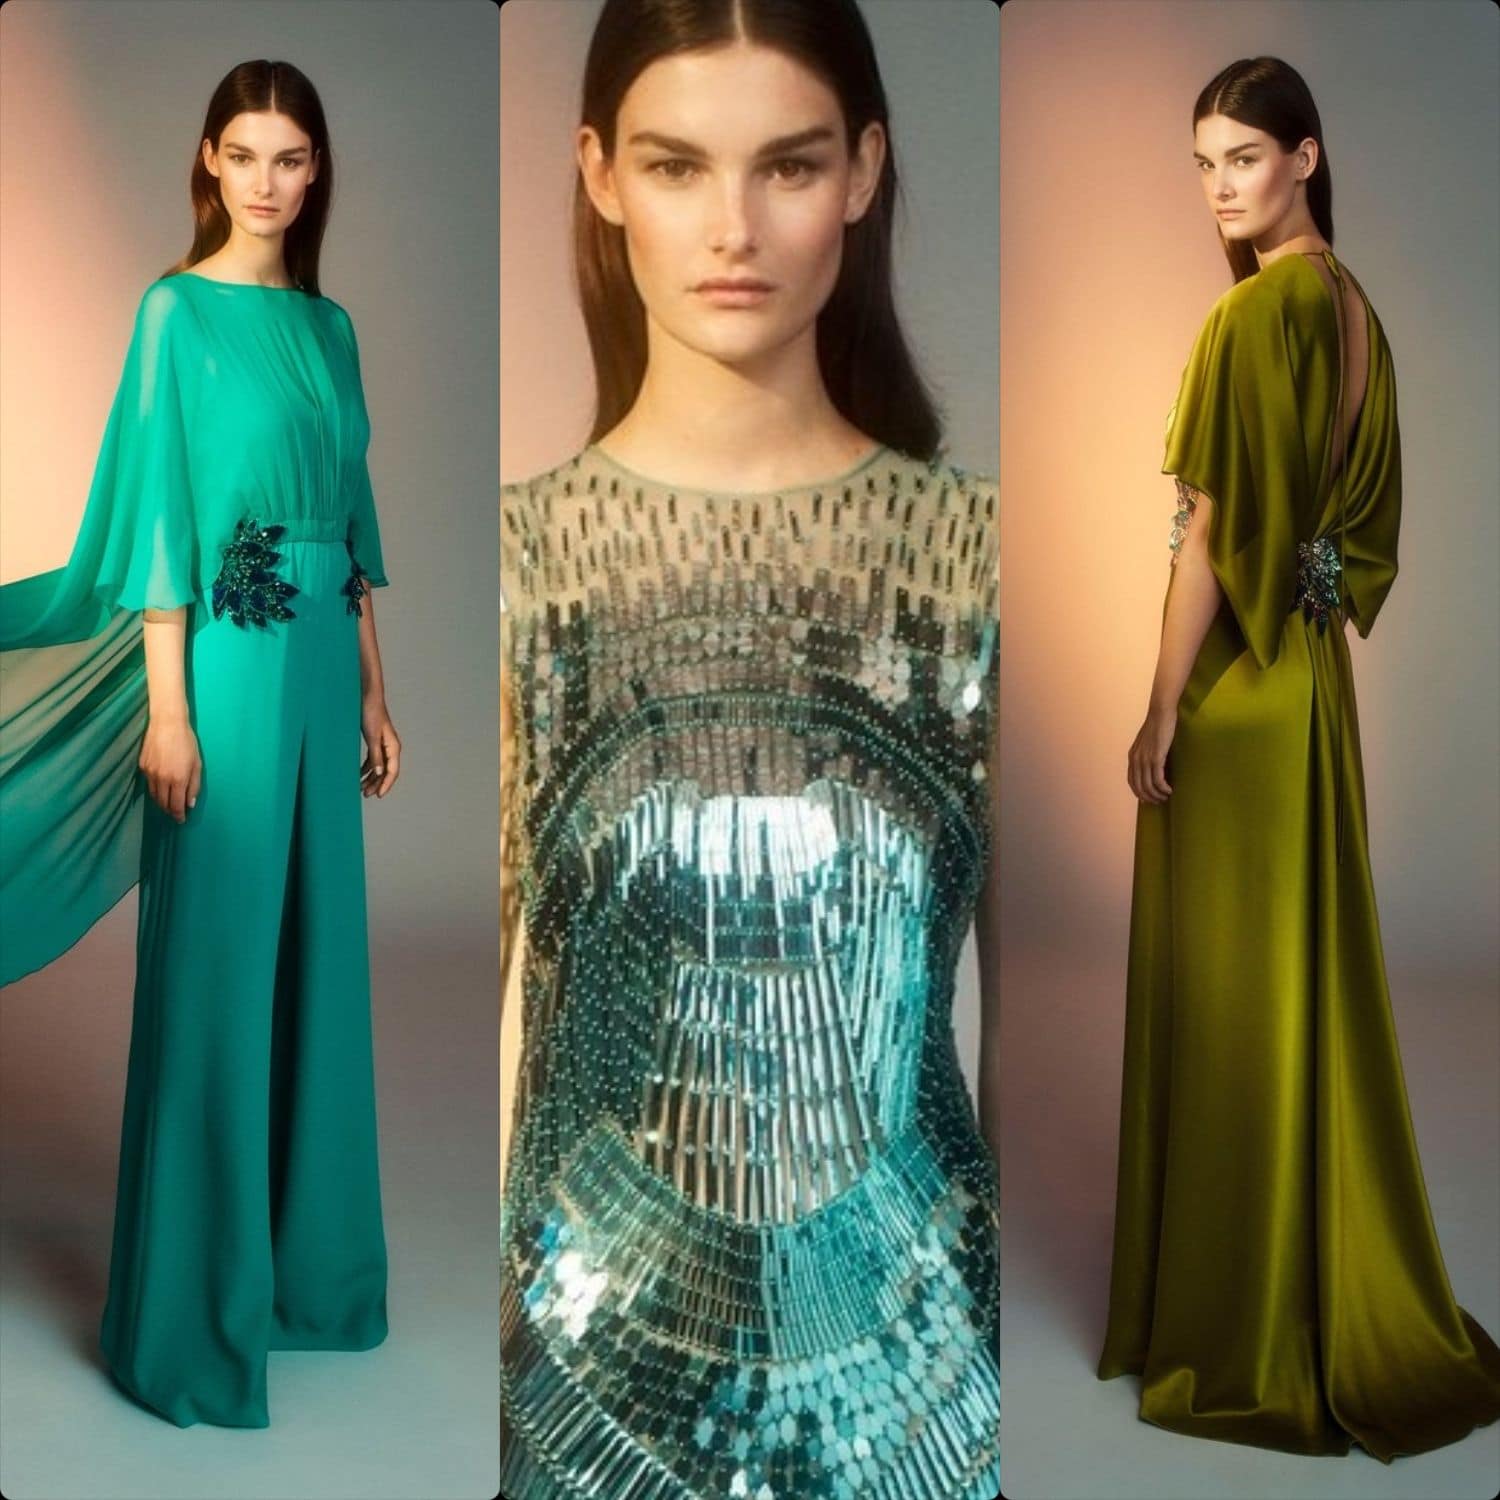 Alberta Ferretti Limited Edition Haute Couture Fall-Winter 2019-2020. RUNWAY MAGAZINE ® Collections. RUNWAY NOW / RUNWAY NEW